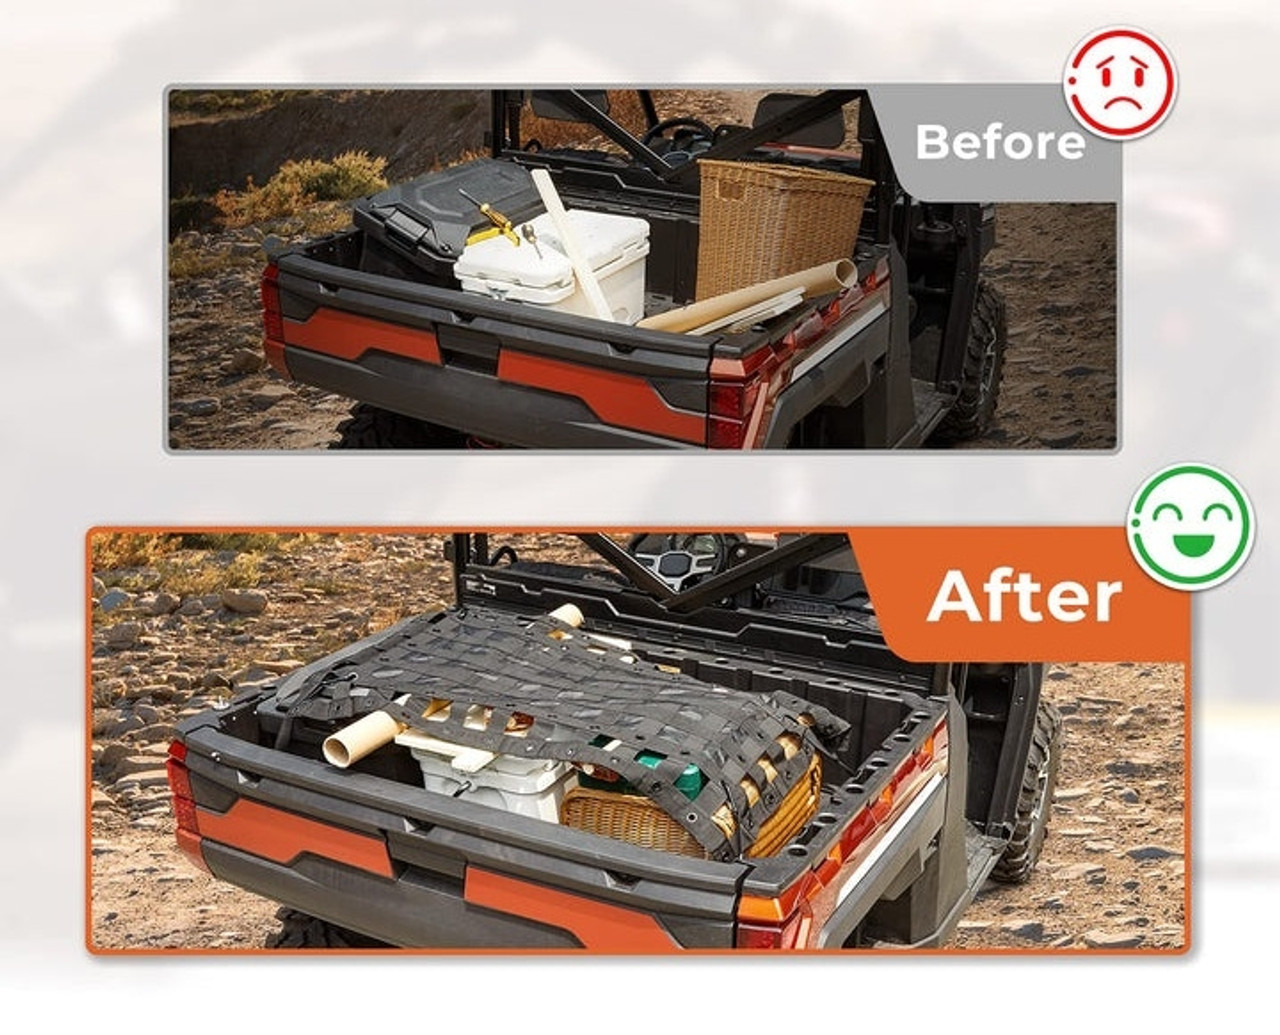 A set of "before and after images" showing an ATV bed filled with unsecured items (before) and the same ATV's bed secured with Kemimoto's Heavy Duty Bed Cargo Net (after)